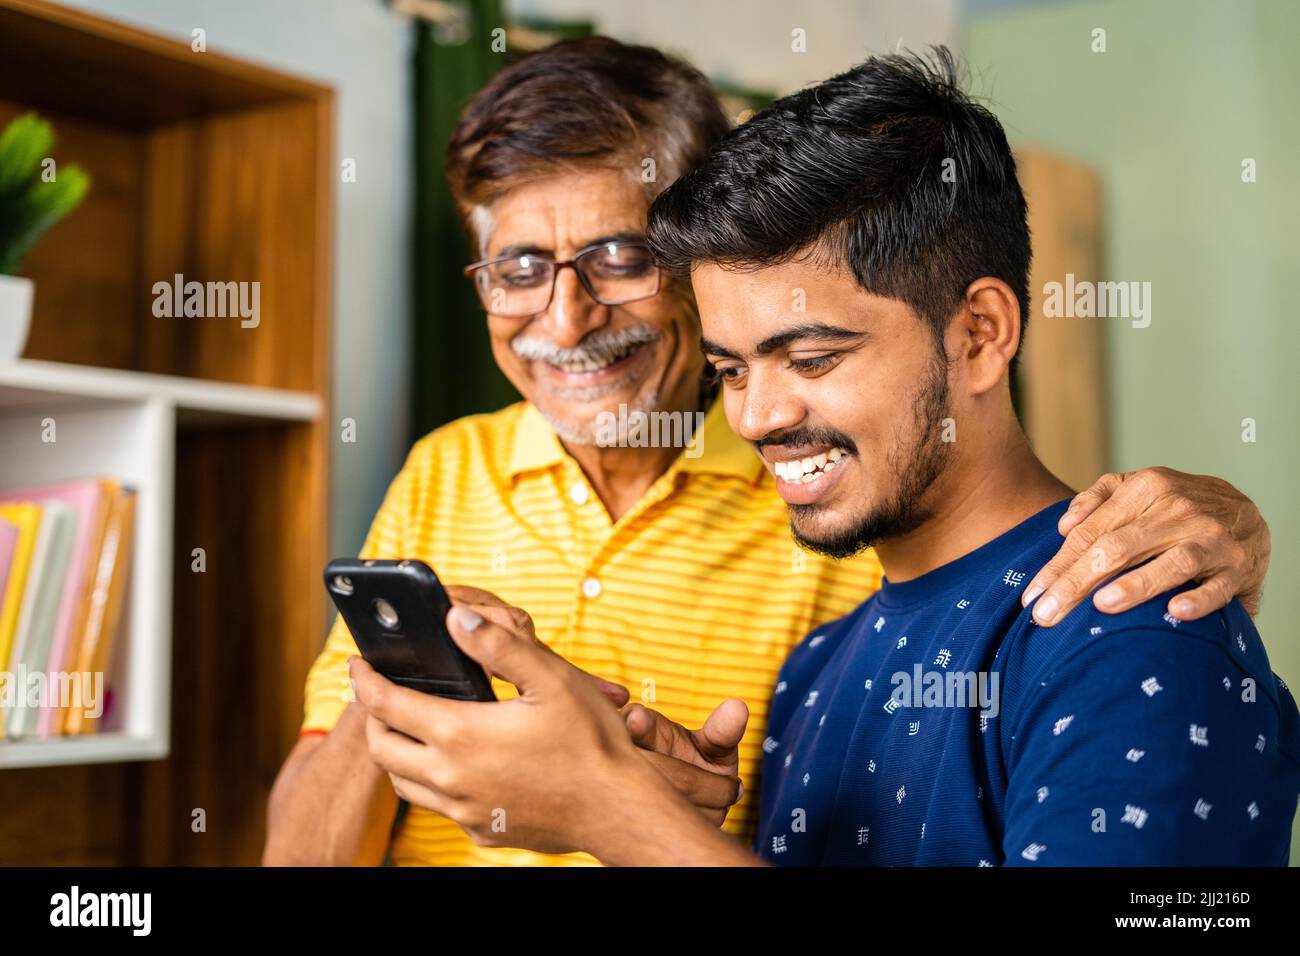 Happy smiling grandson showing new application on Mobile phone to grandfather at home - concept of social media, surfing internet and cyberspace Stock Photo